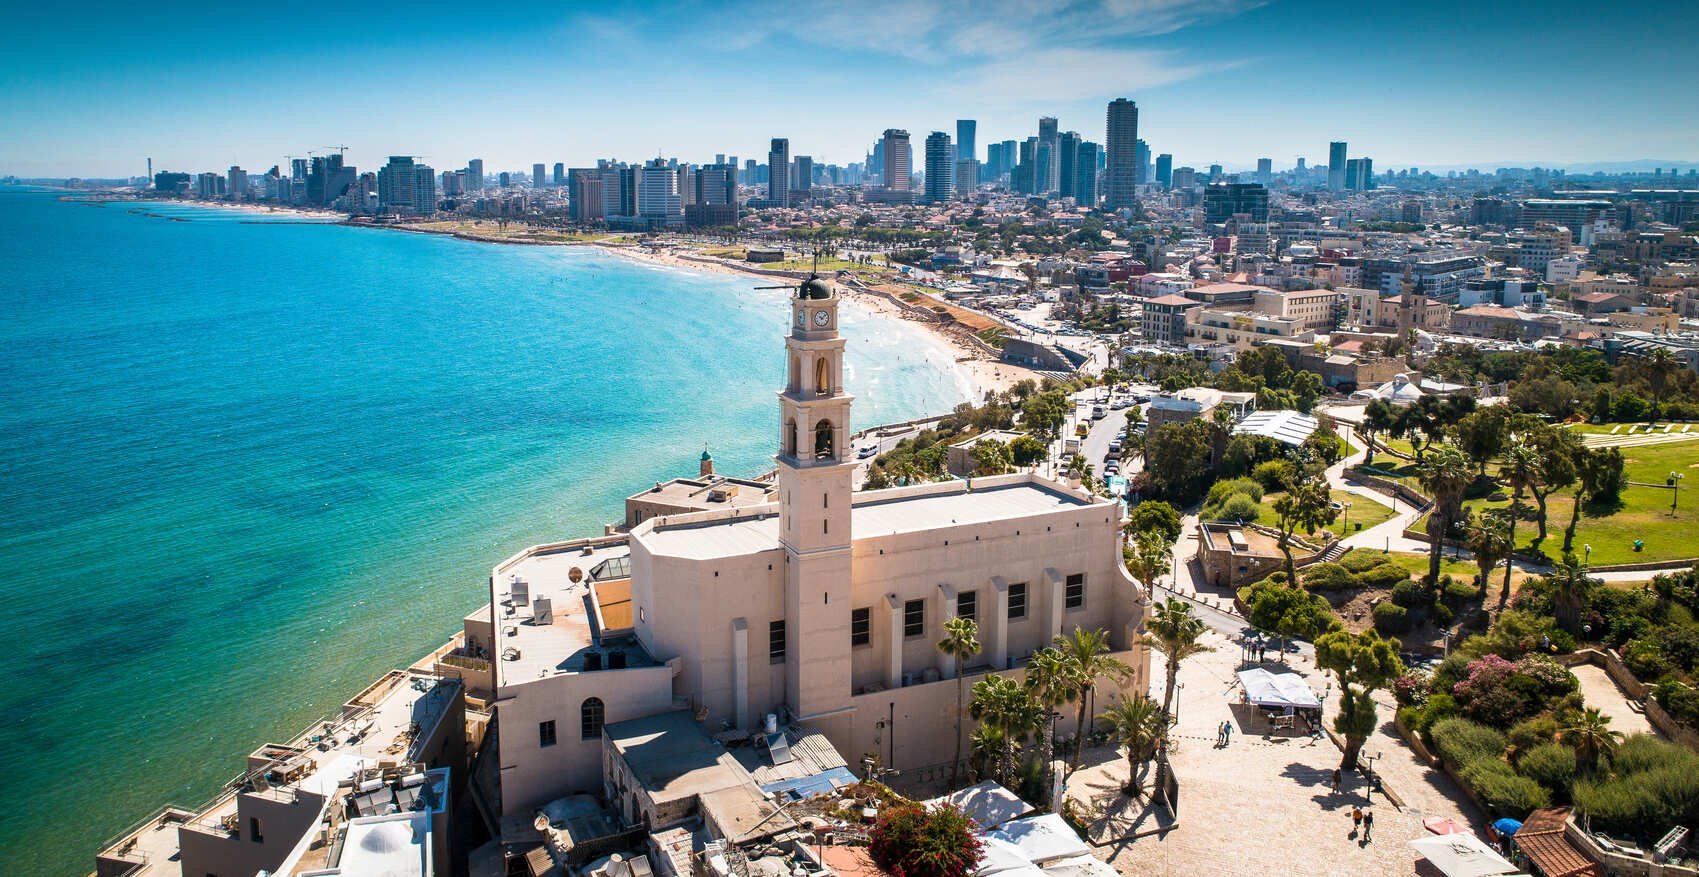 luxury boutique hotels in Israel and Tel Aviv